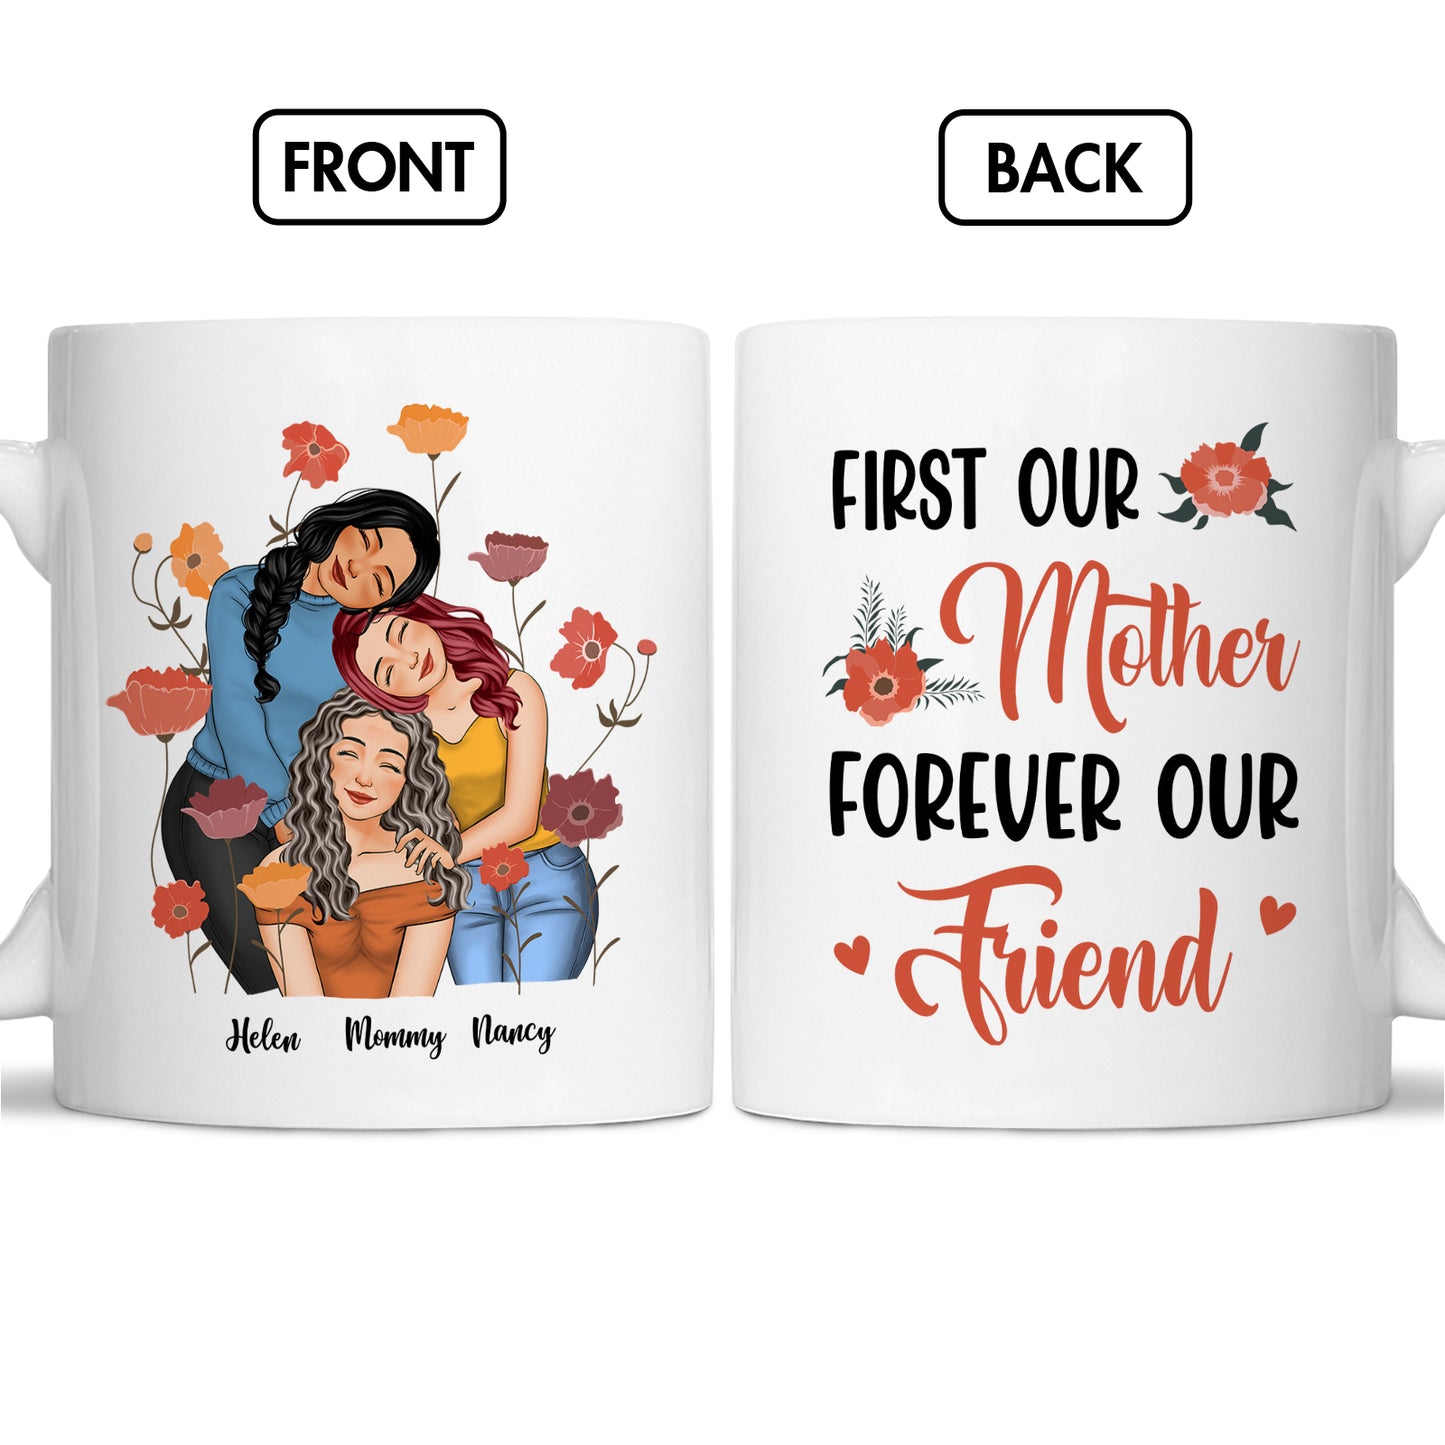 Mother - Mother & Daughters-A Bond That Can't Be Broken - Personalized Mug